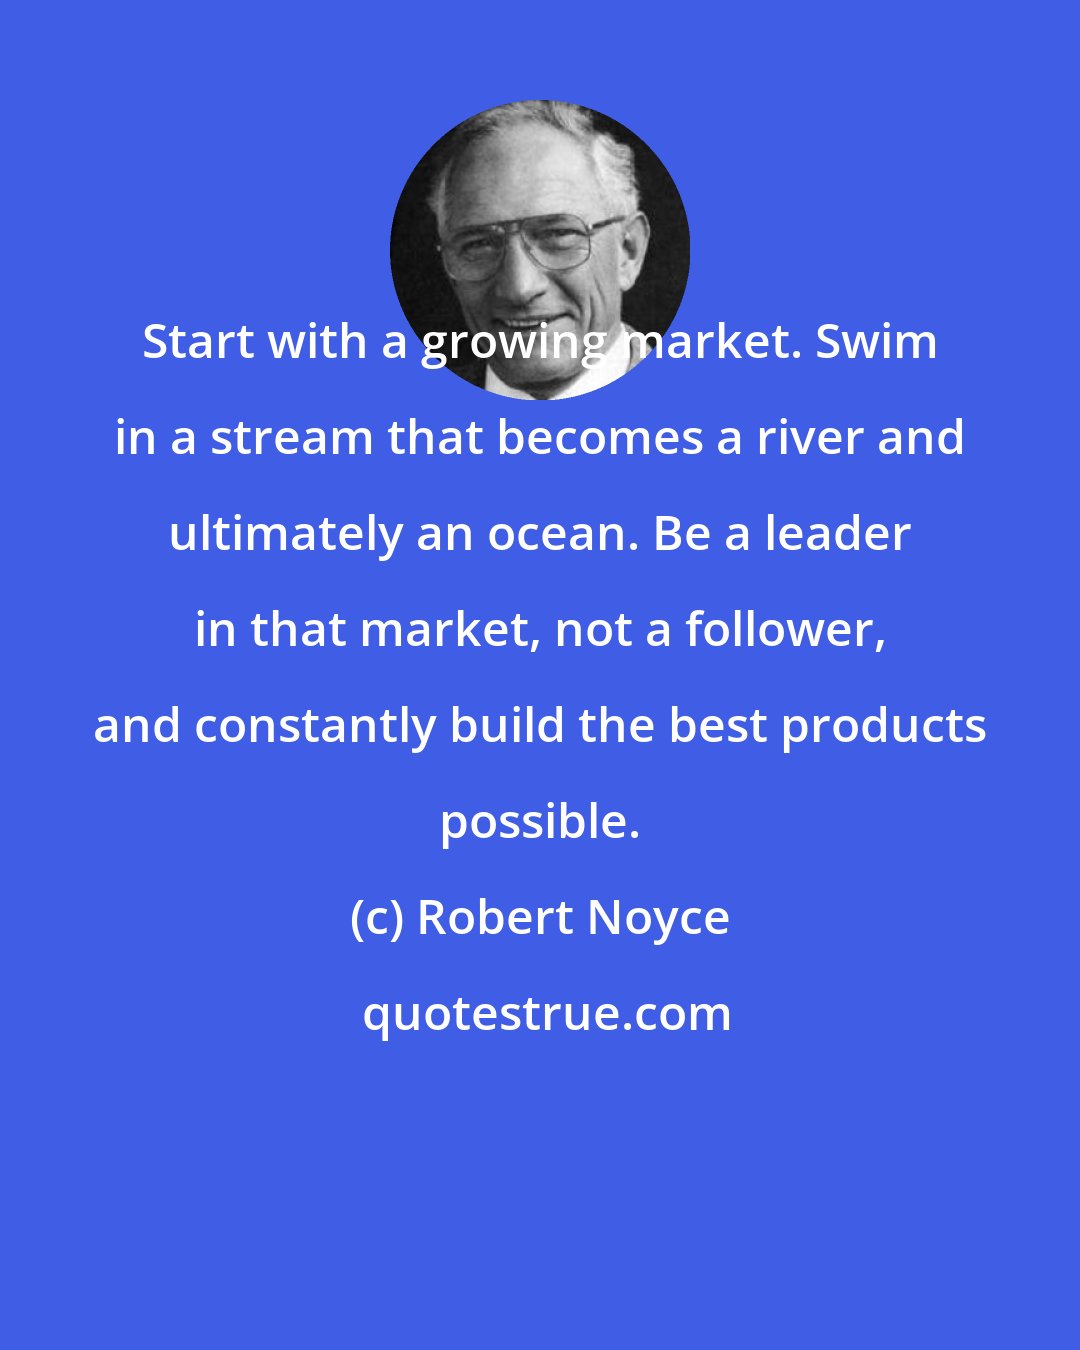 Robert Noyce: Start with a growing market. Swim in a stream that becomes a river and ultimately an ocean. Be a leader in that market, not a follower, and constantly build the best products possible.